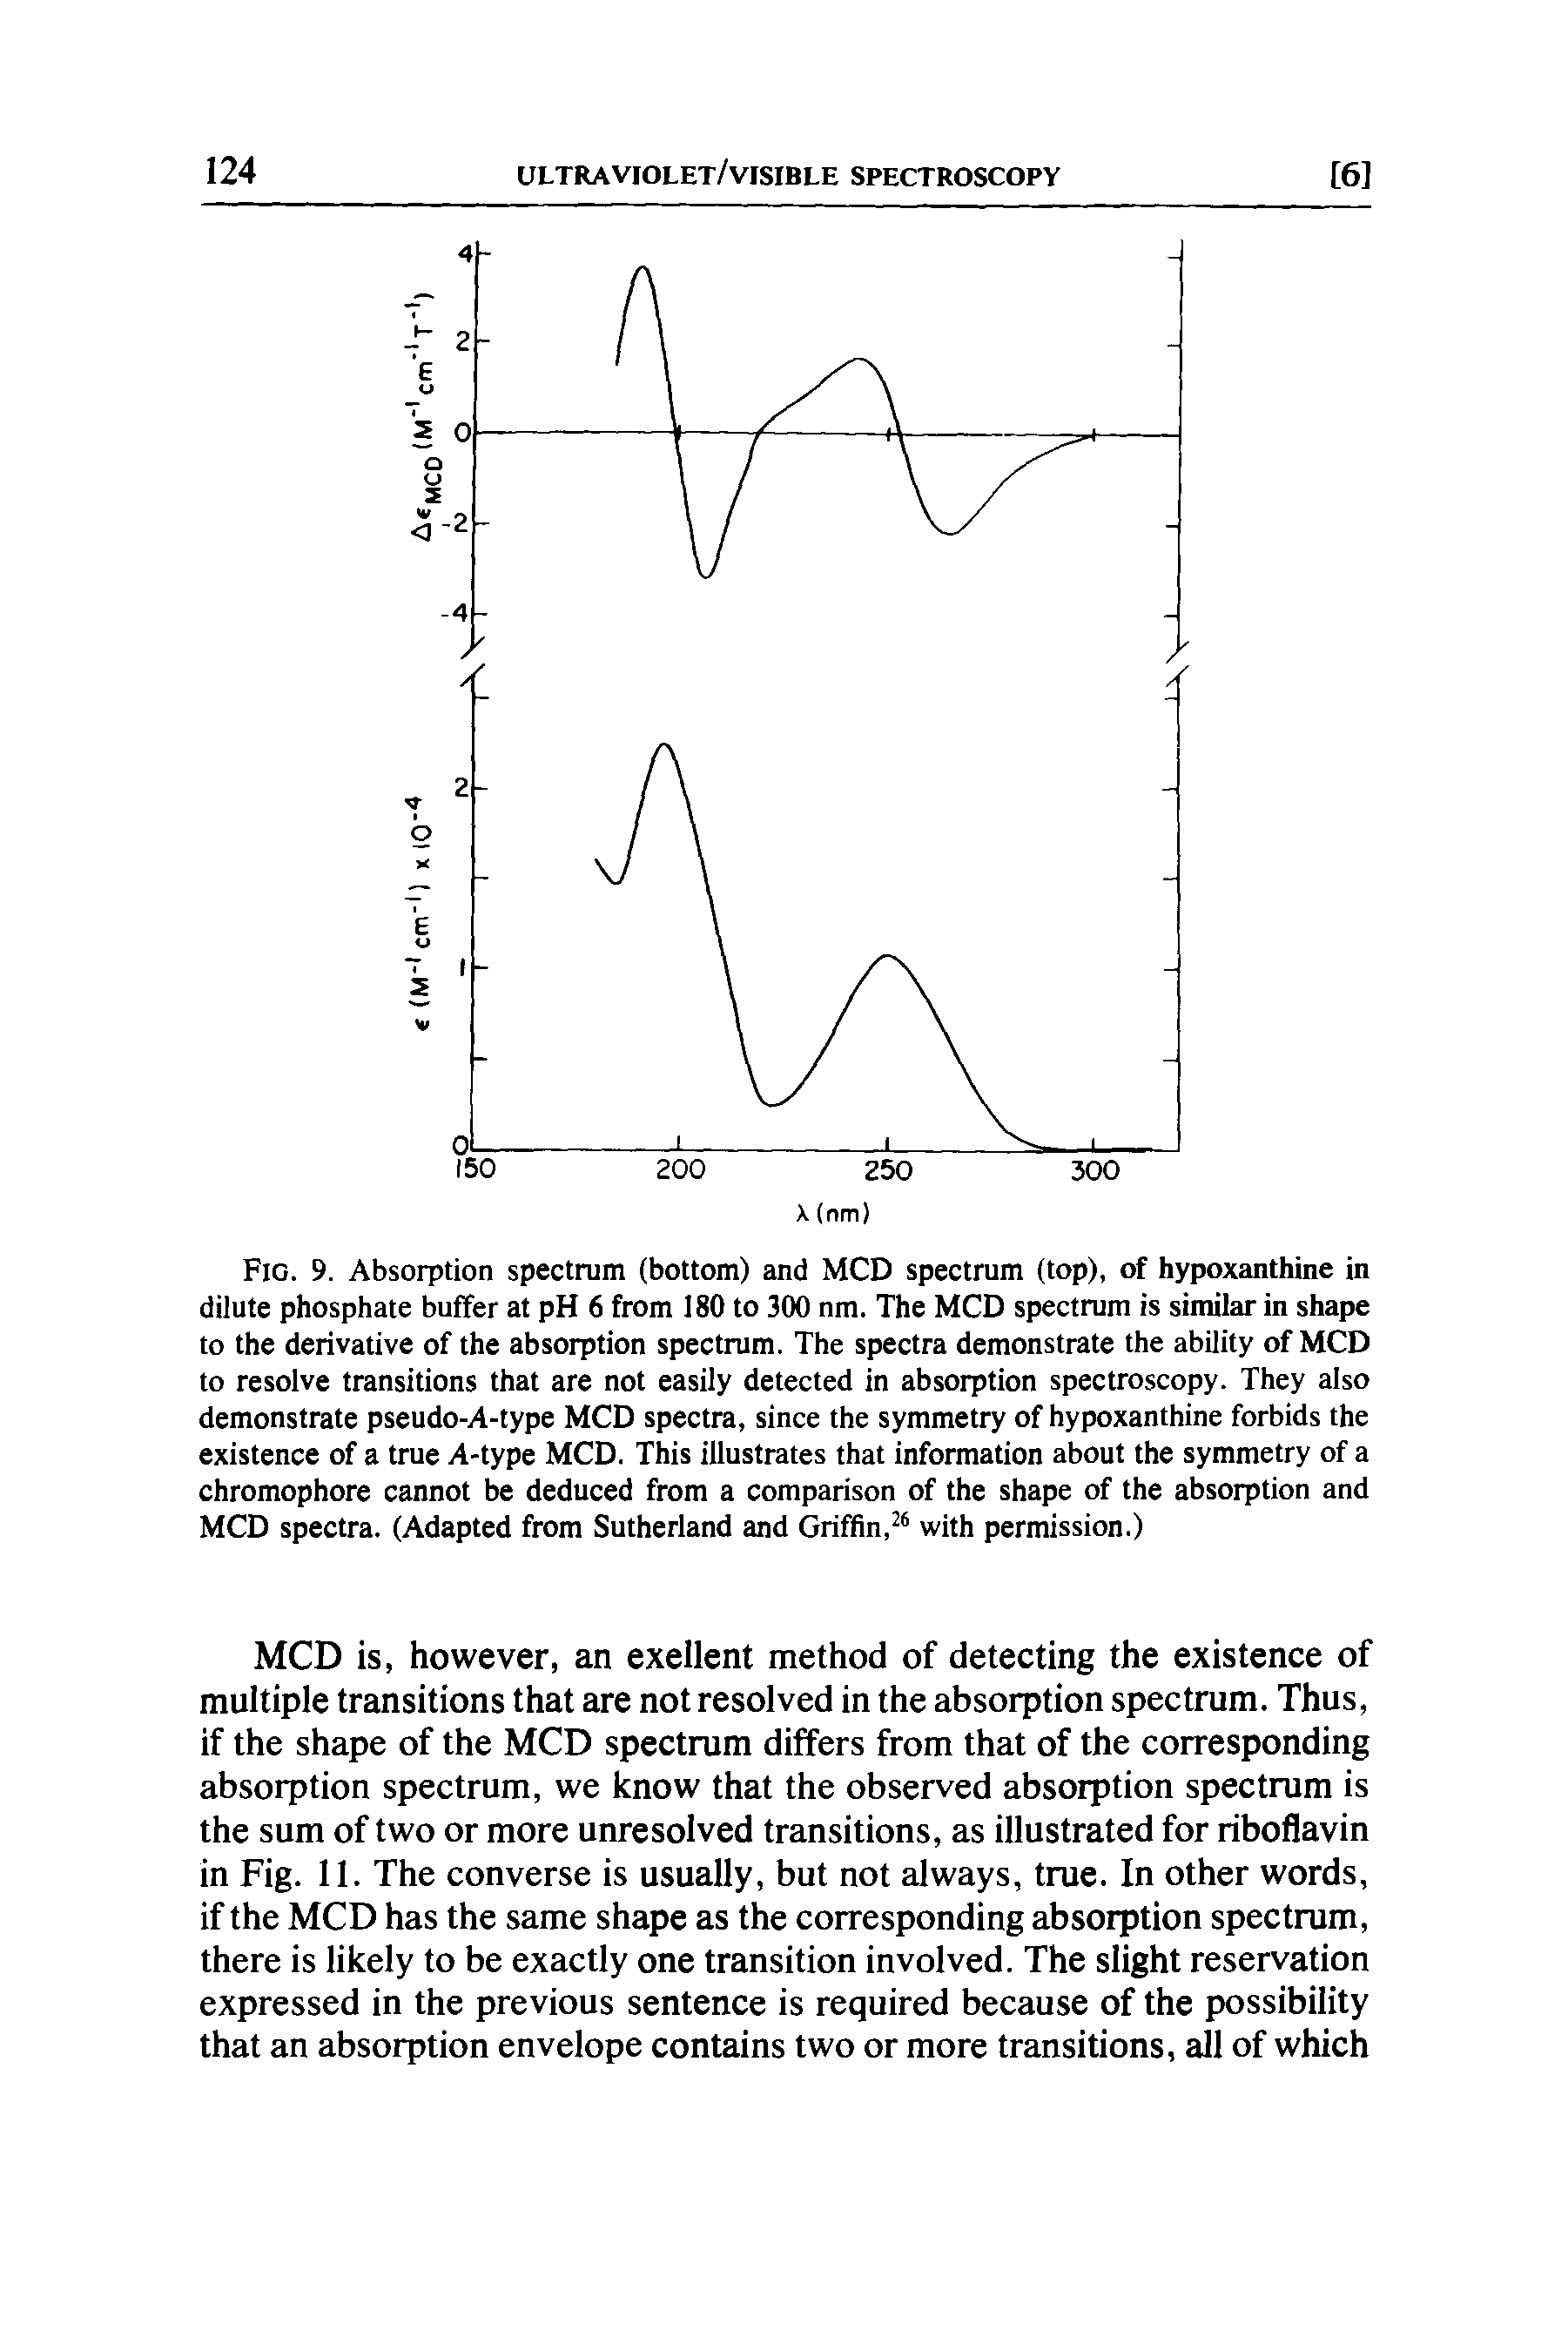 Fig. 9. Absorption spectrum (bottom) and MCD spectrum (top), of hypoxanthine in dilute phosphate buffer at pH 6 from 180 to 300 nm. The MCD spectrum is similar in shape to the derivative of the absorption spectrum. The spectra demonstrate the ability of MCD to resolve transitions that are not easily detected in absorption spectroscopy. They also demonstrate pseudo-A-type MCD spectra, since the symmetry of hypoxanthine forbids the existence of a true A-type MCD. This illustrates that information about the symmetry of a chromophore cannot be deduced from a comparison of the shape of the absorption and MCD spectra. (Adapted from Sutherland and Griffin,with permission.)...